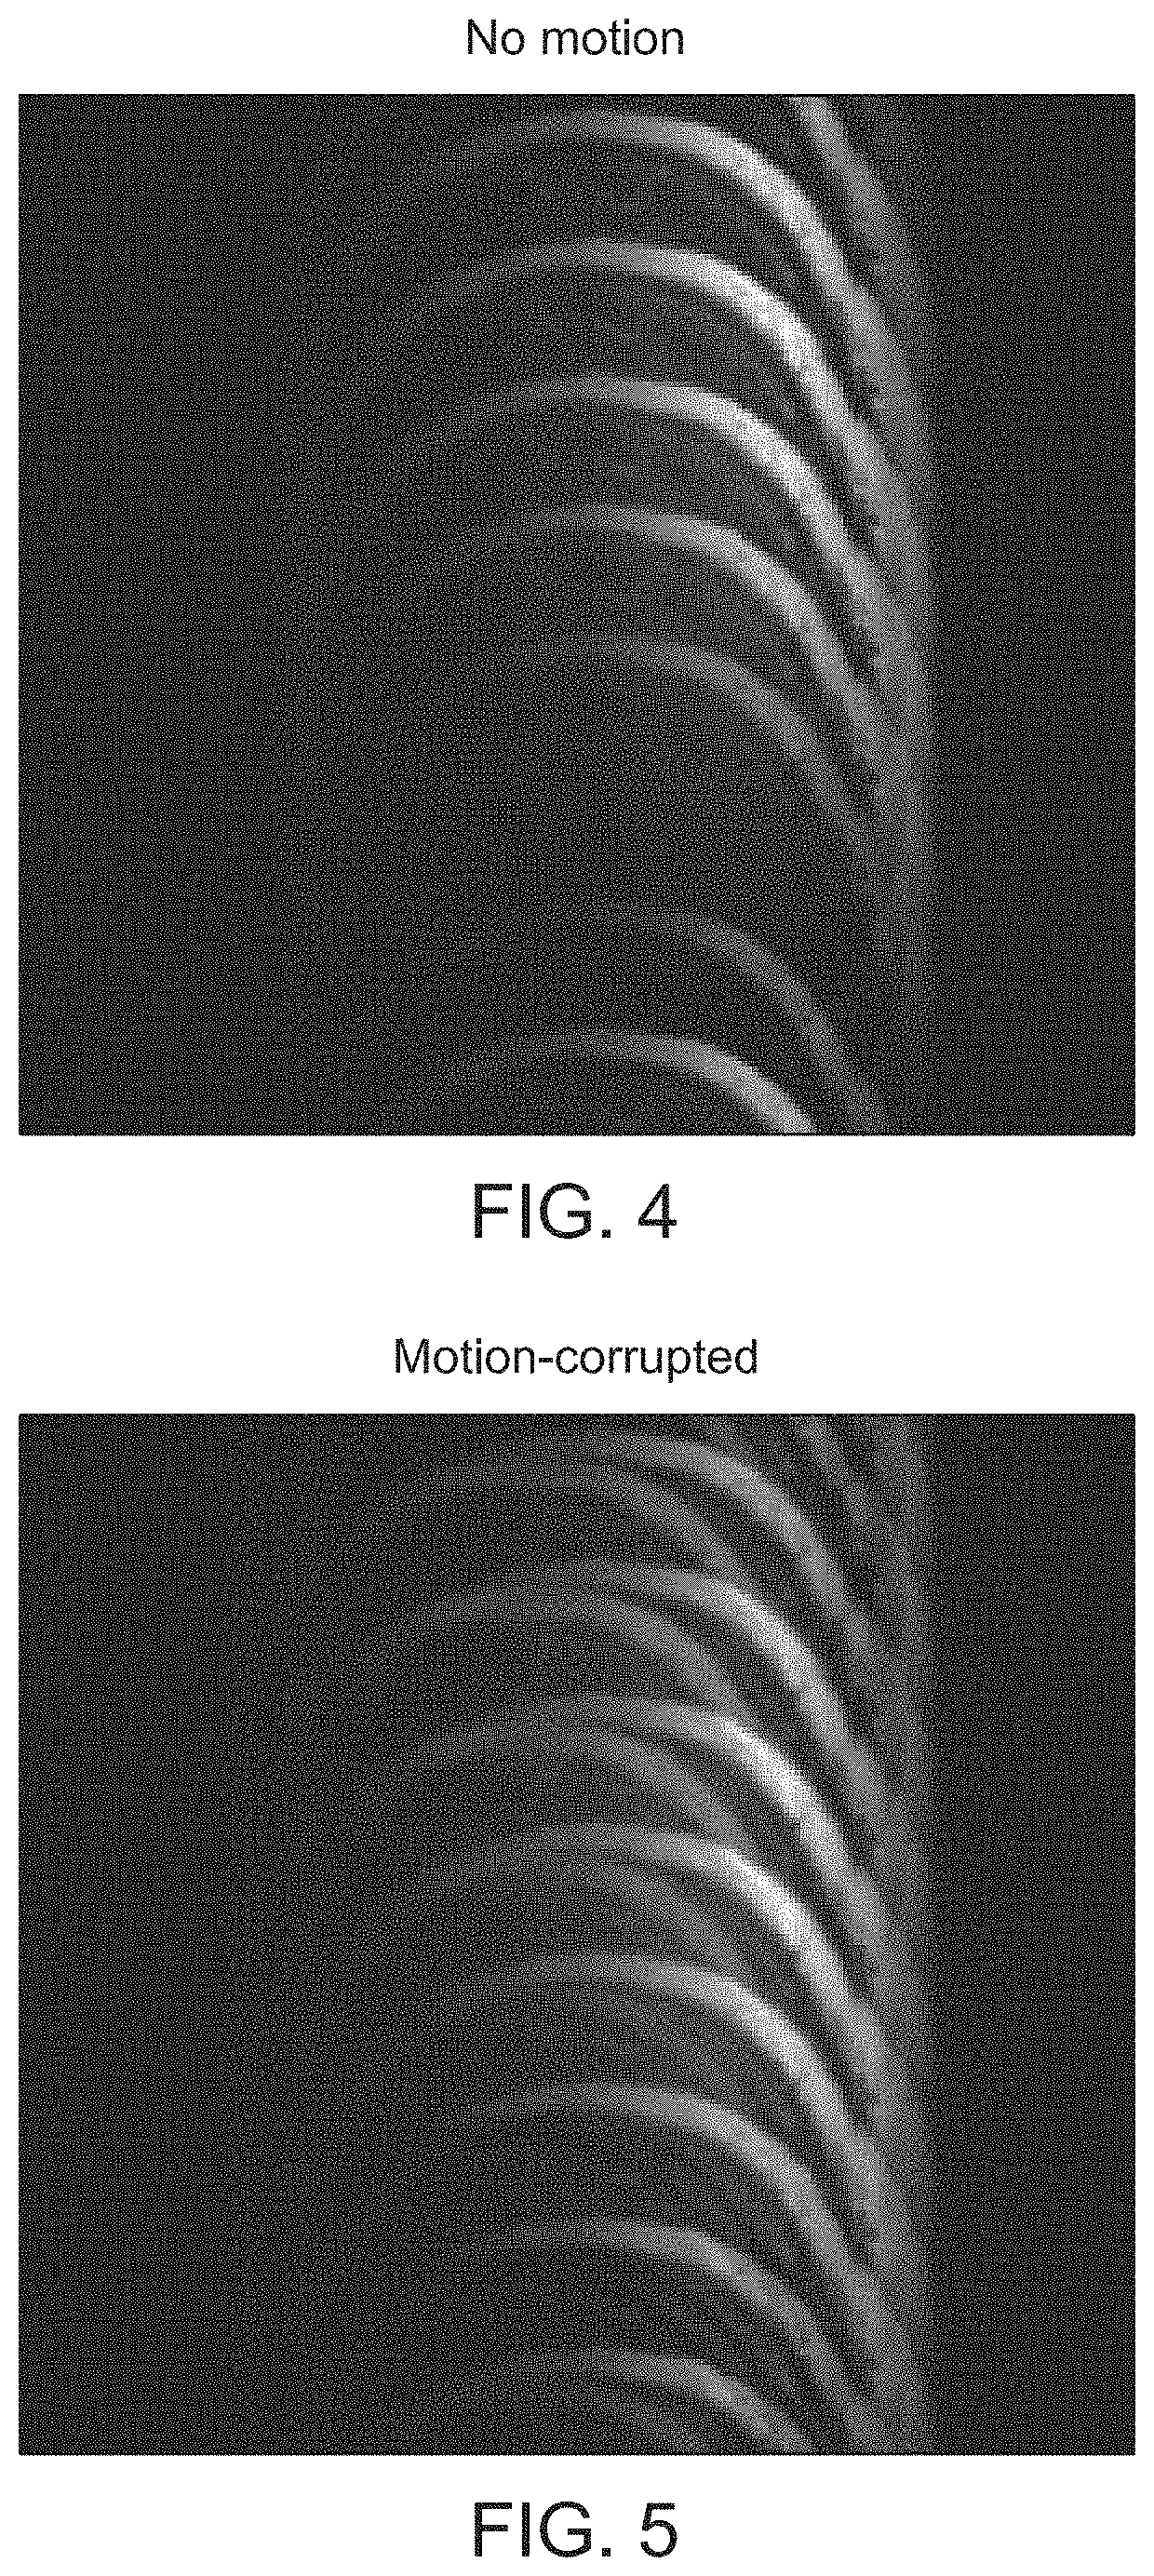 MRI system and method using neural network for detection of patient motion